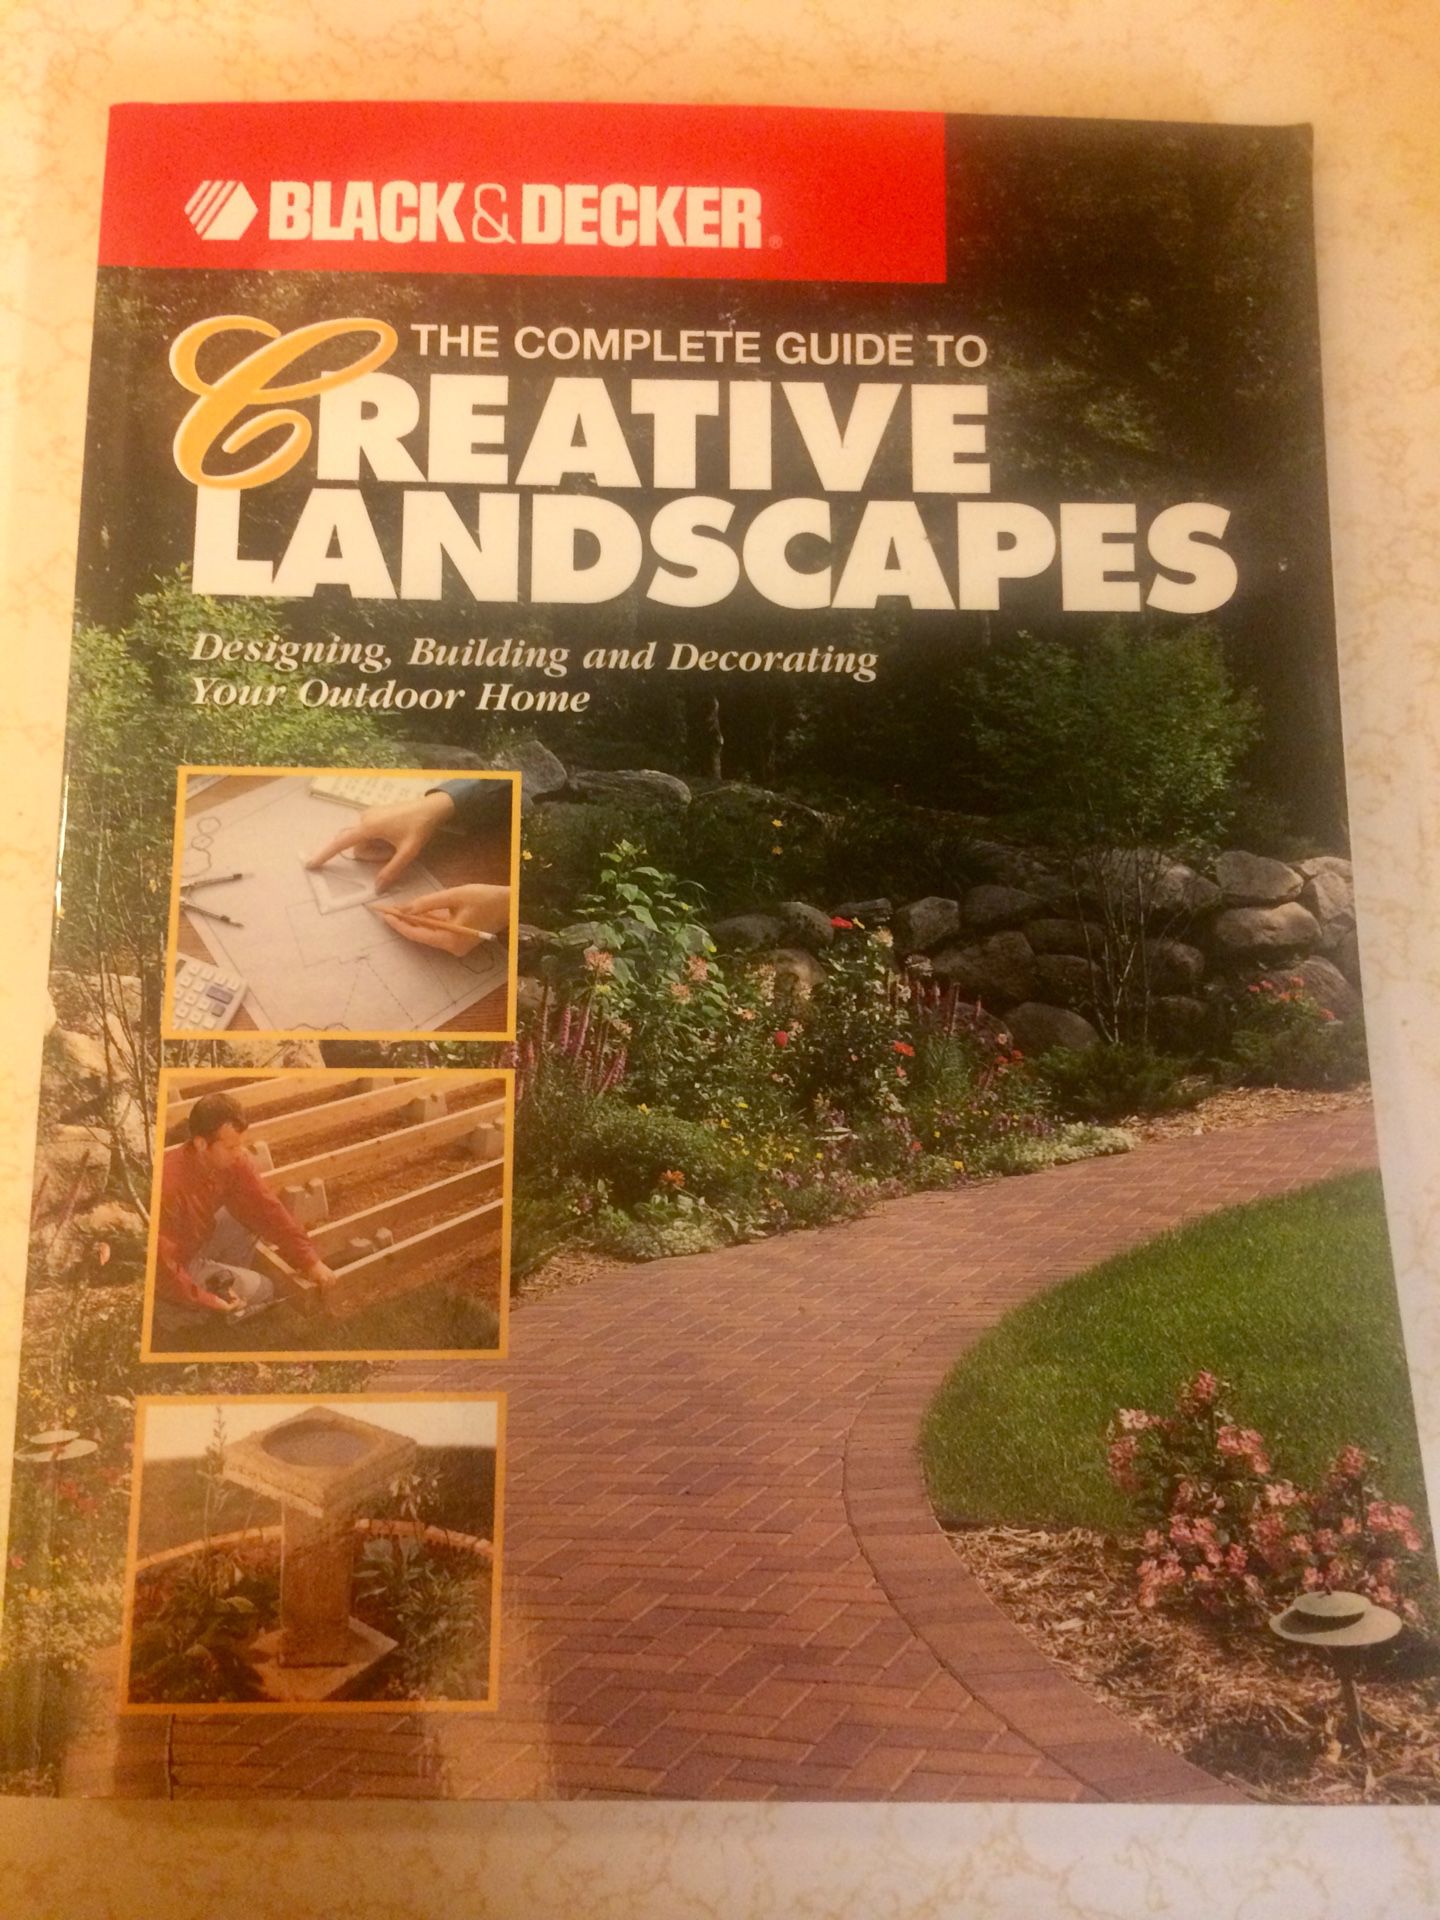 Black & Decker Complete Guide to Creative Landscaping